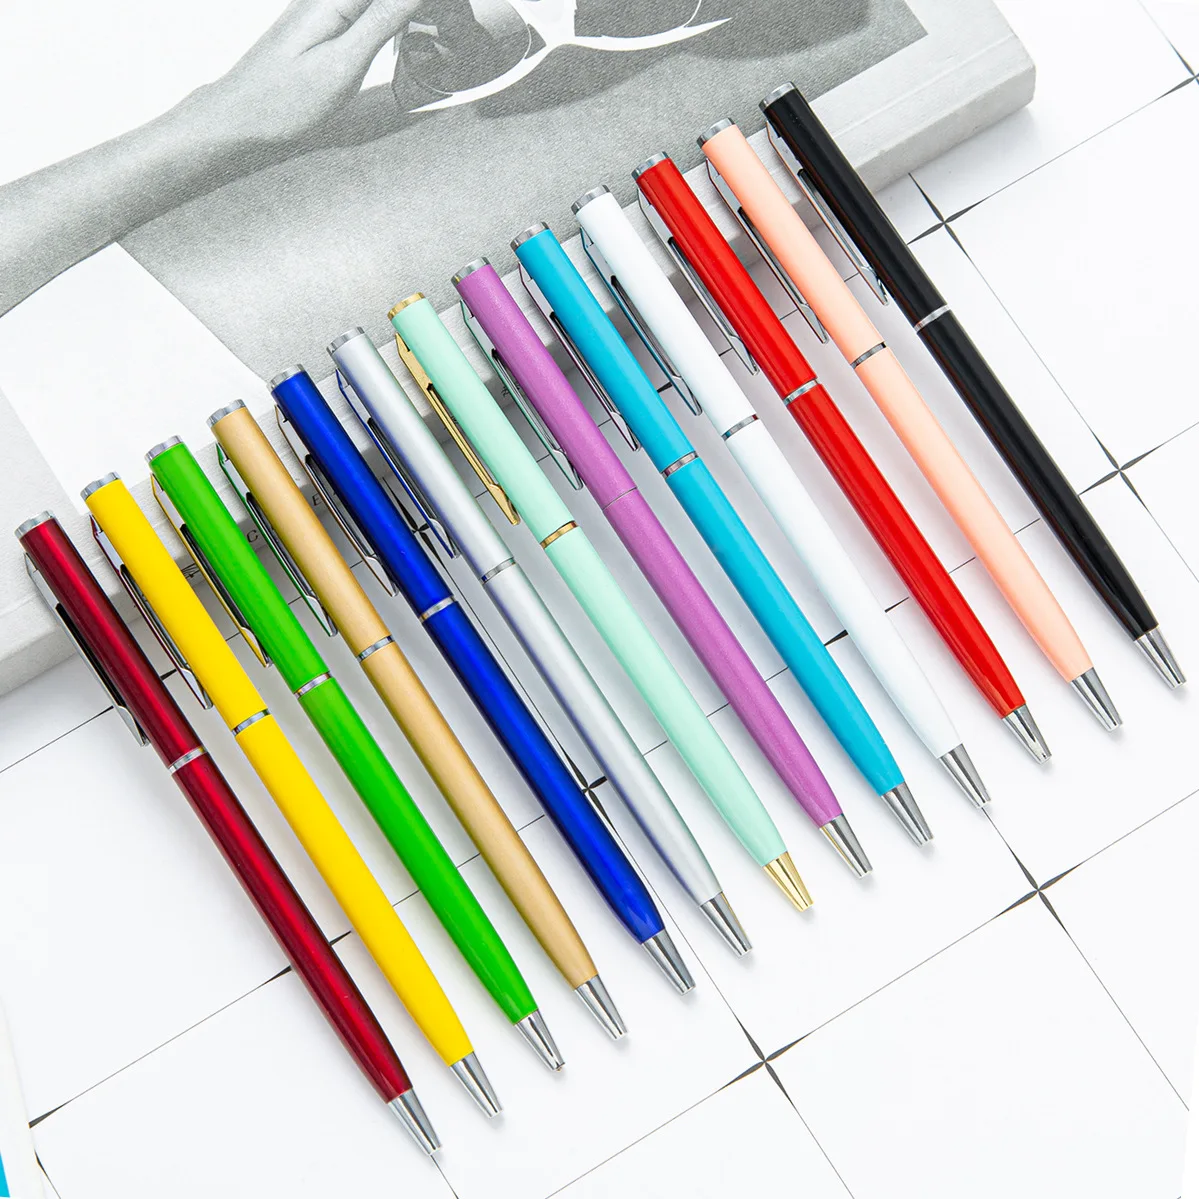 100pcs/lot Personalize Metal Ballpoint Pen Support logo/Text words engraved advertising wholesale Customized metal pen